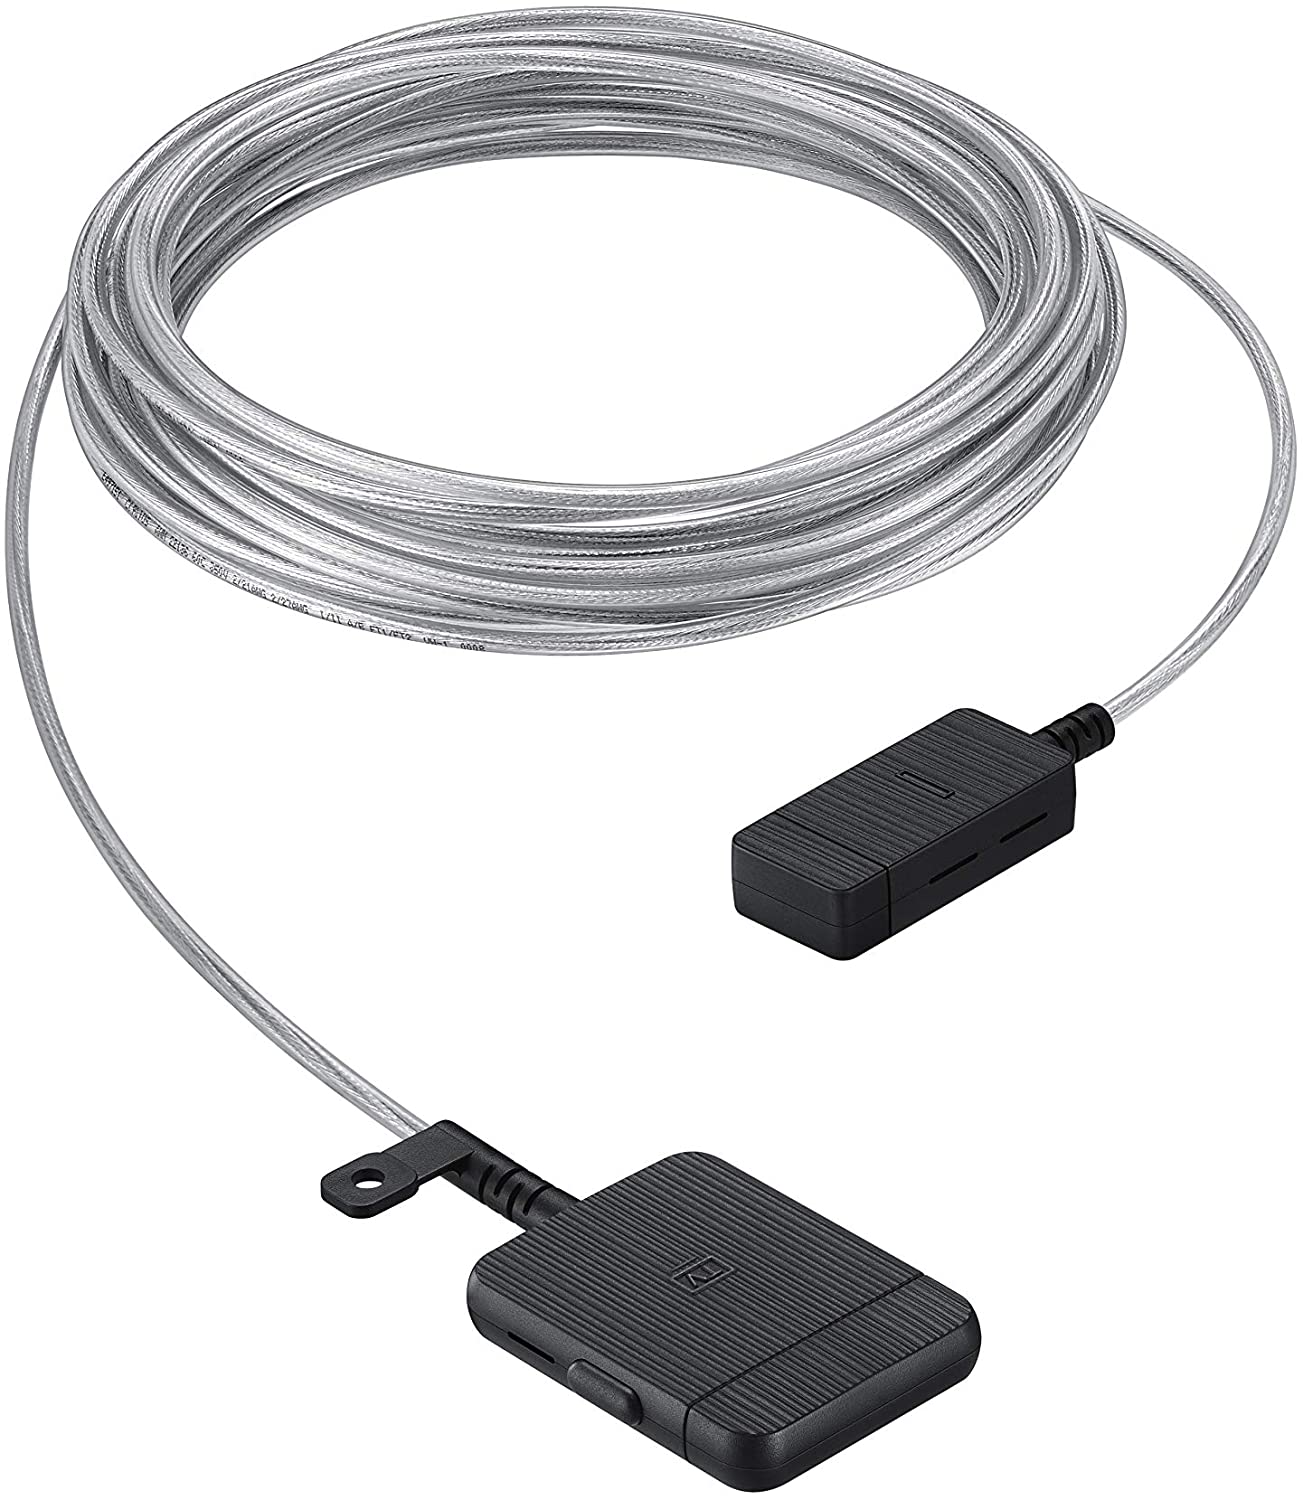 Samsung 15m One Invisible Connect Cable for QLED 4K & The Frame TVs (2019) - White - VG-SOCR15/ZA